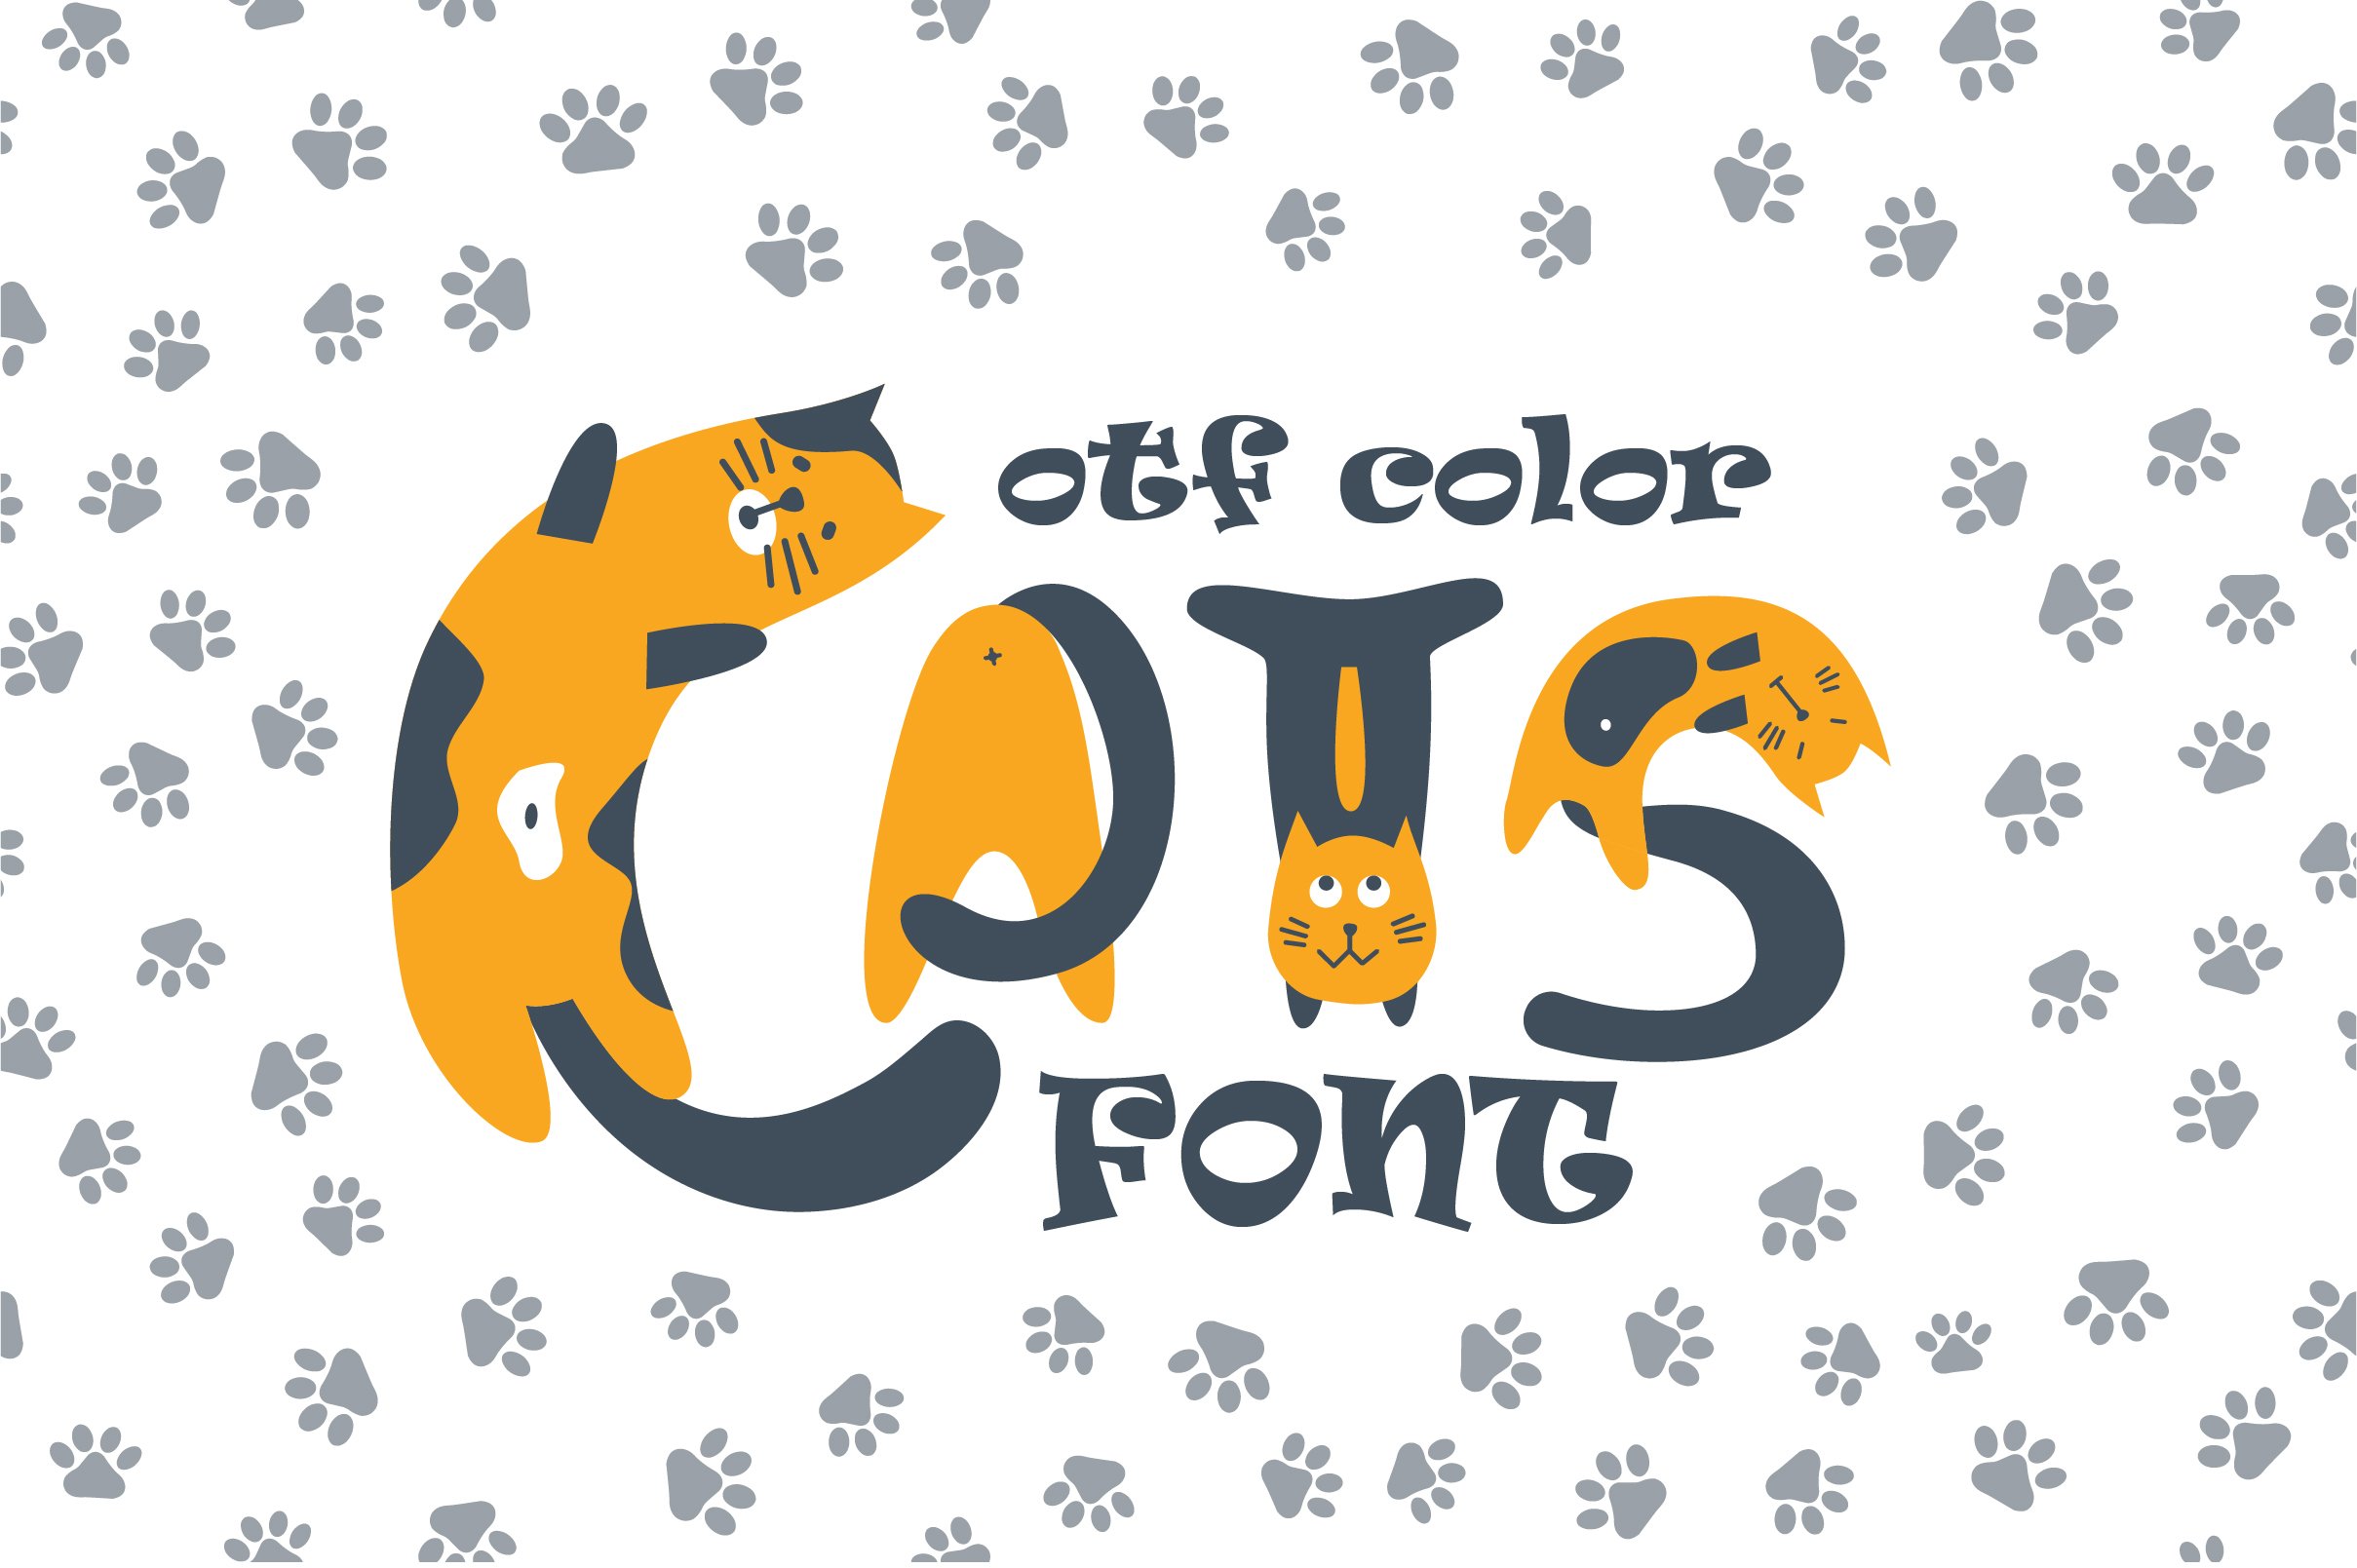 Cats cute OTF color font cover image.